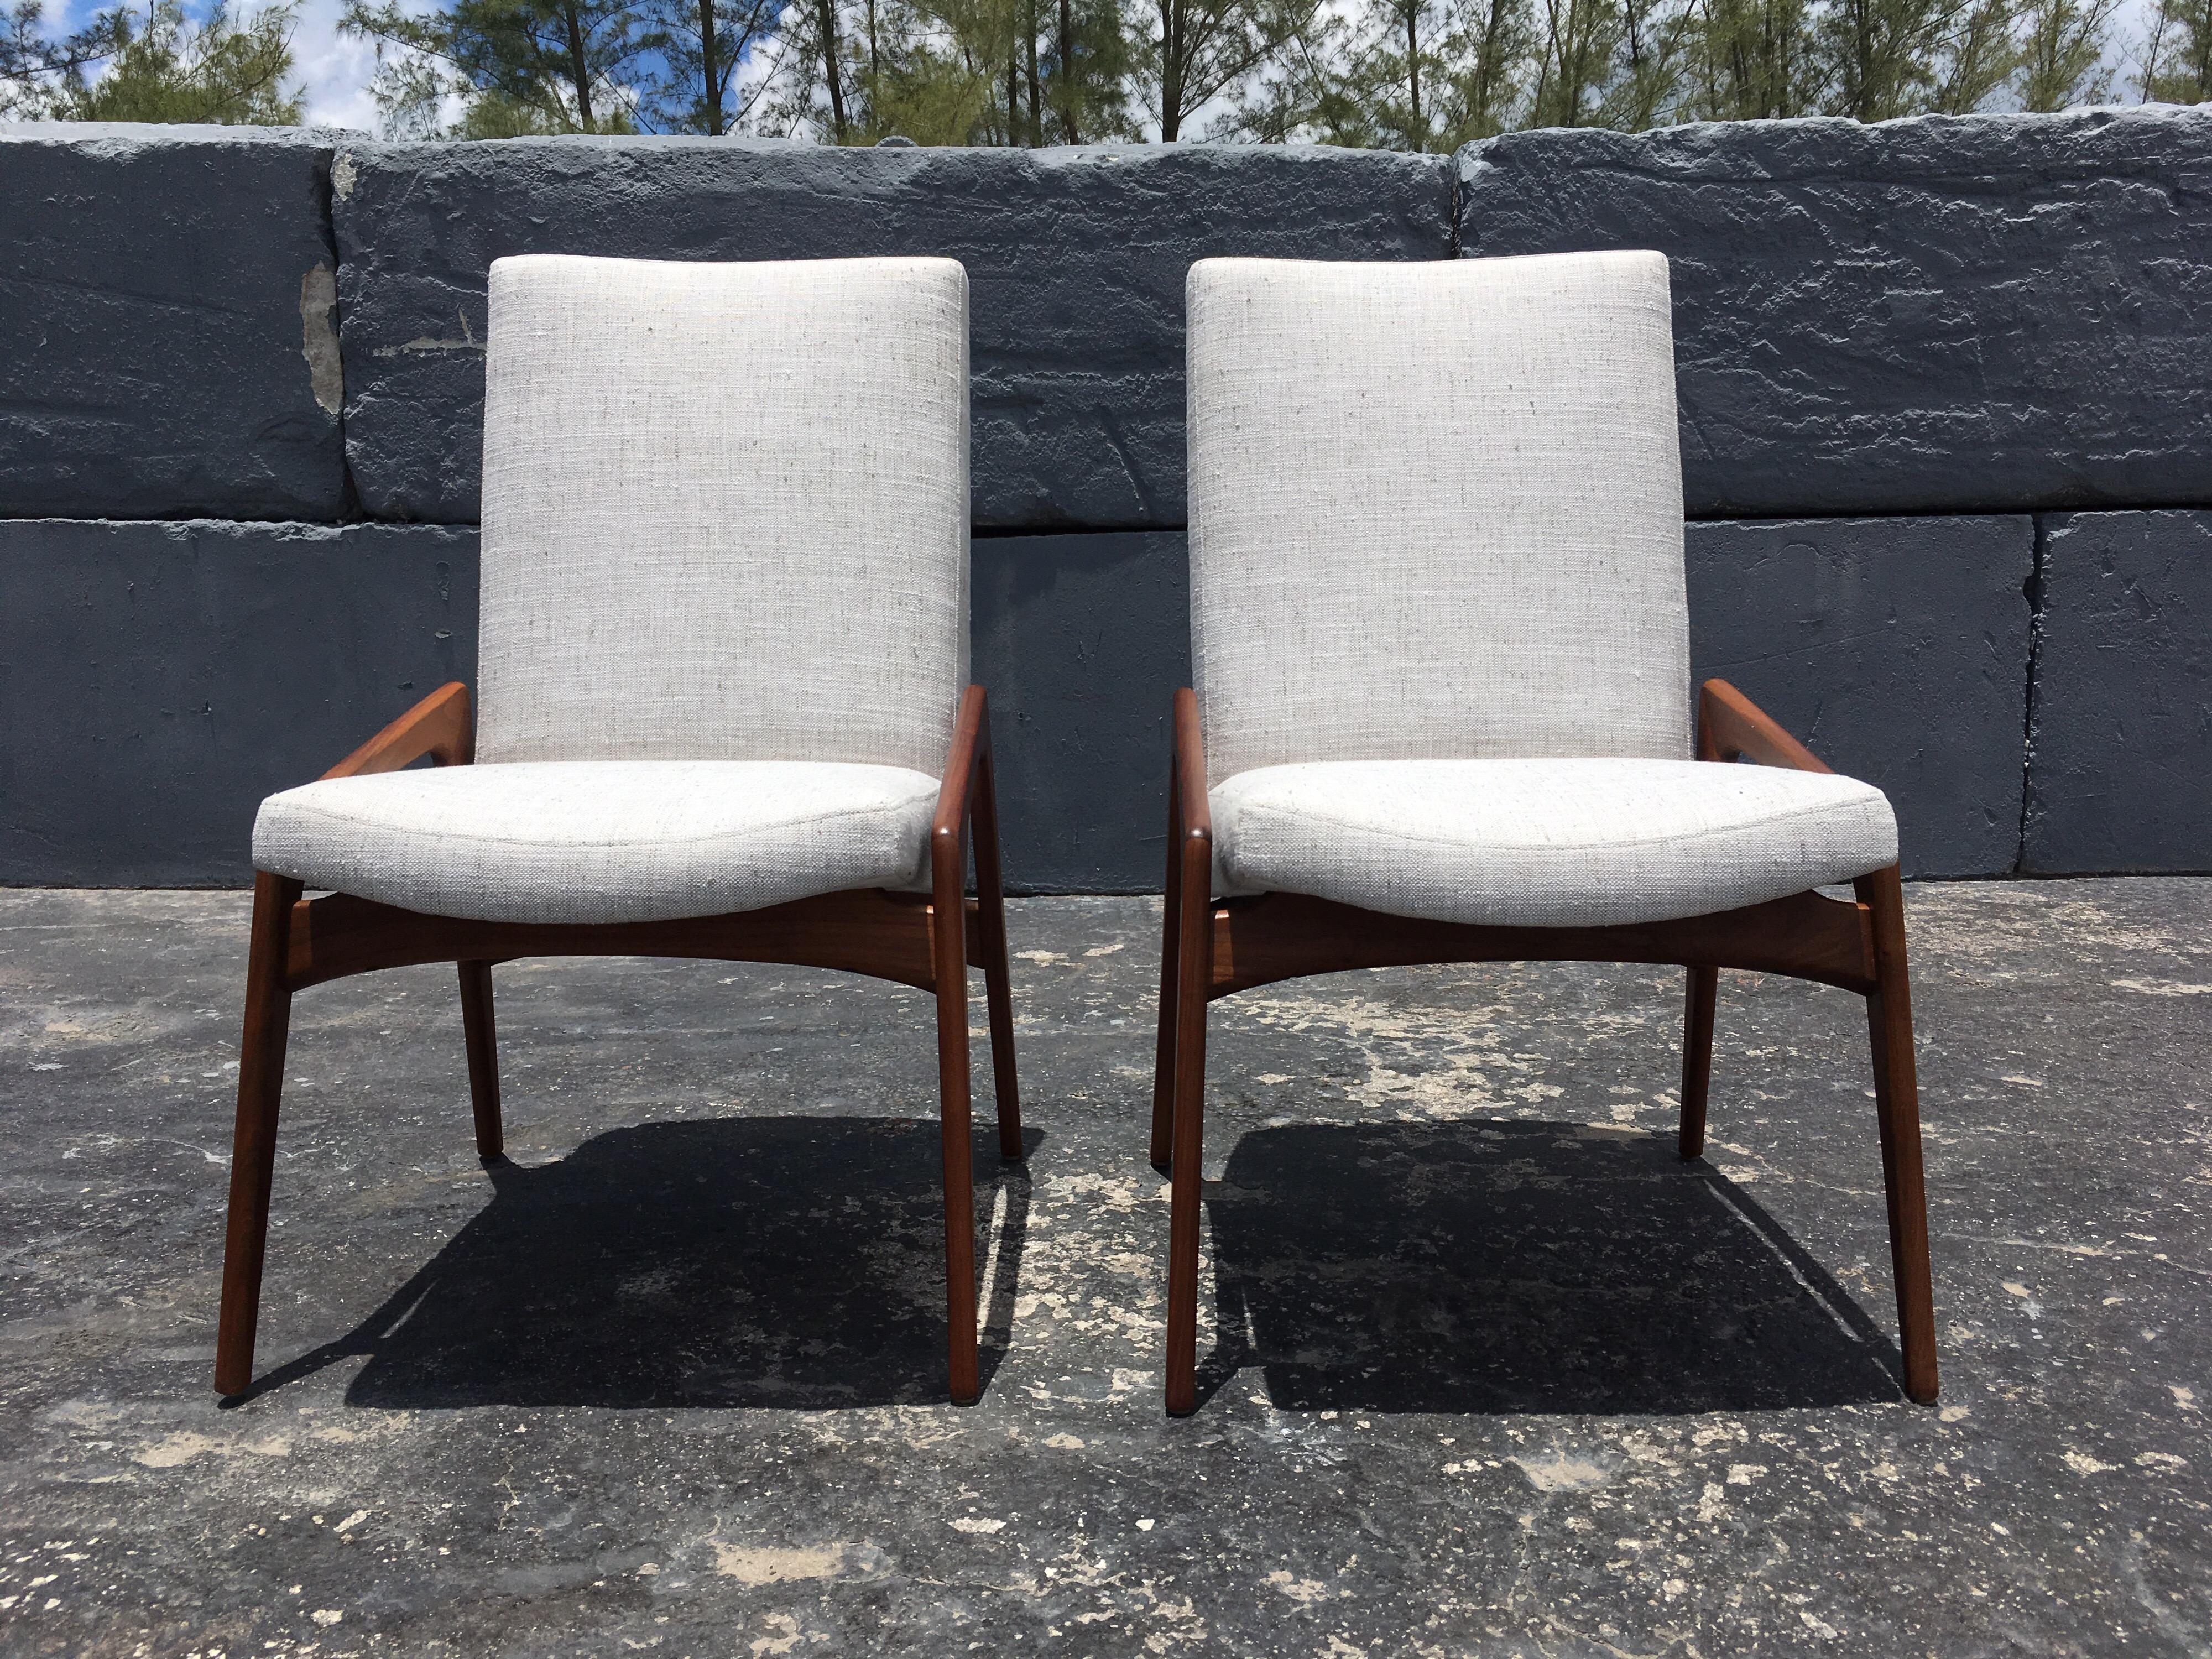 Pair of Danish Modern Chairs, Walnut, 1950s, Excellent Condition For Sale 6